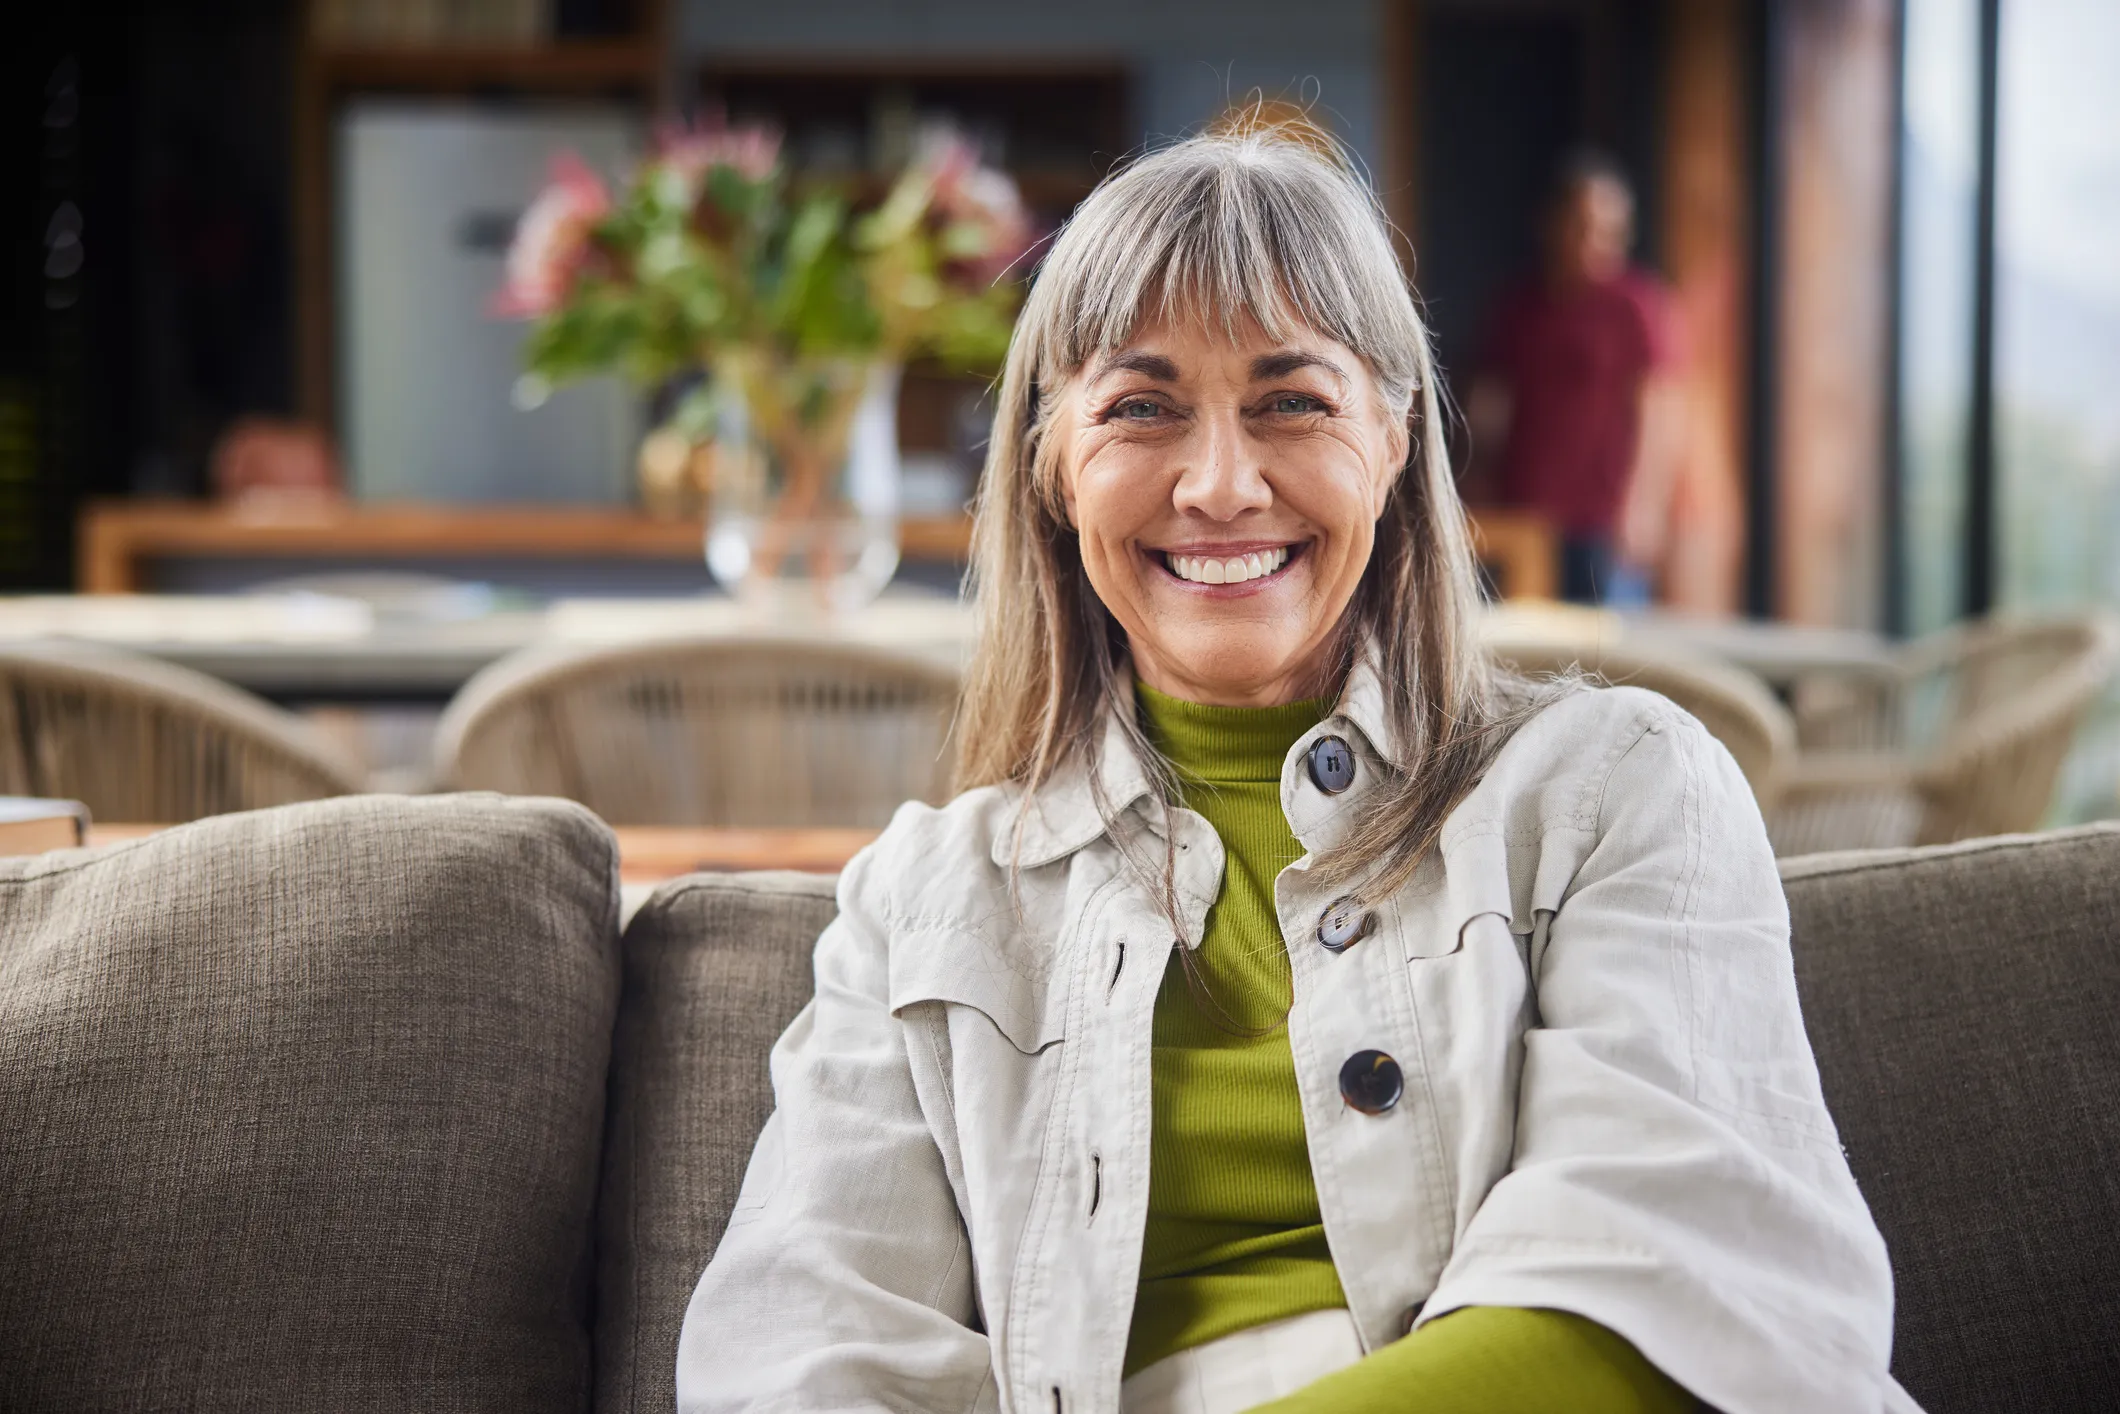 Mature woman smiling while relaxing on a sofa in the living room of her luxury home.